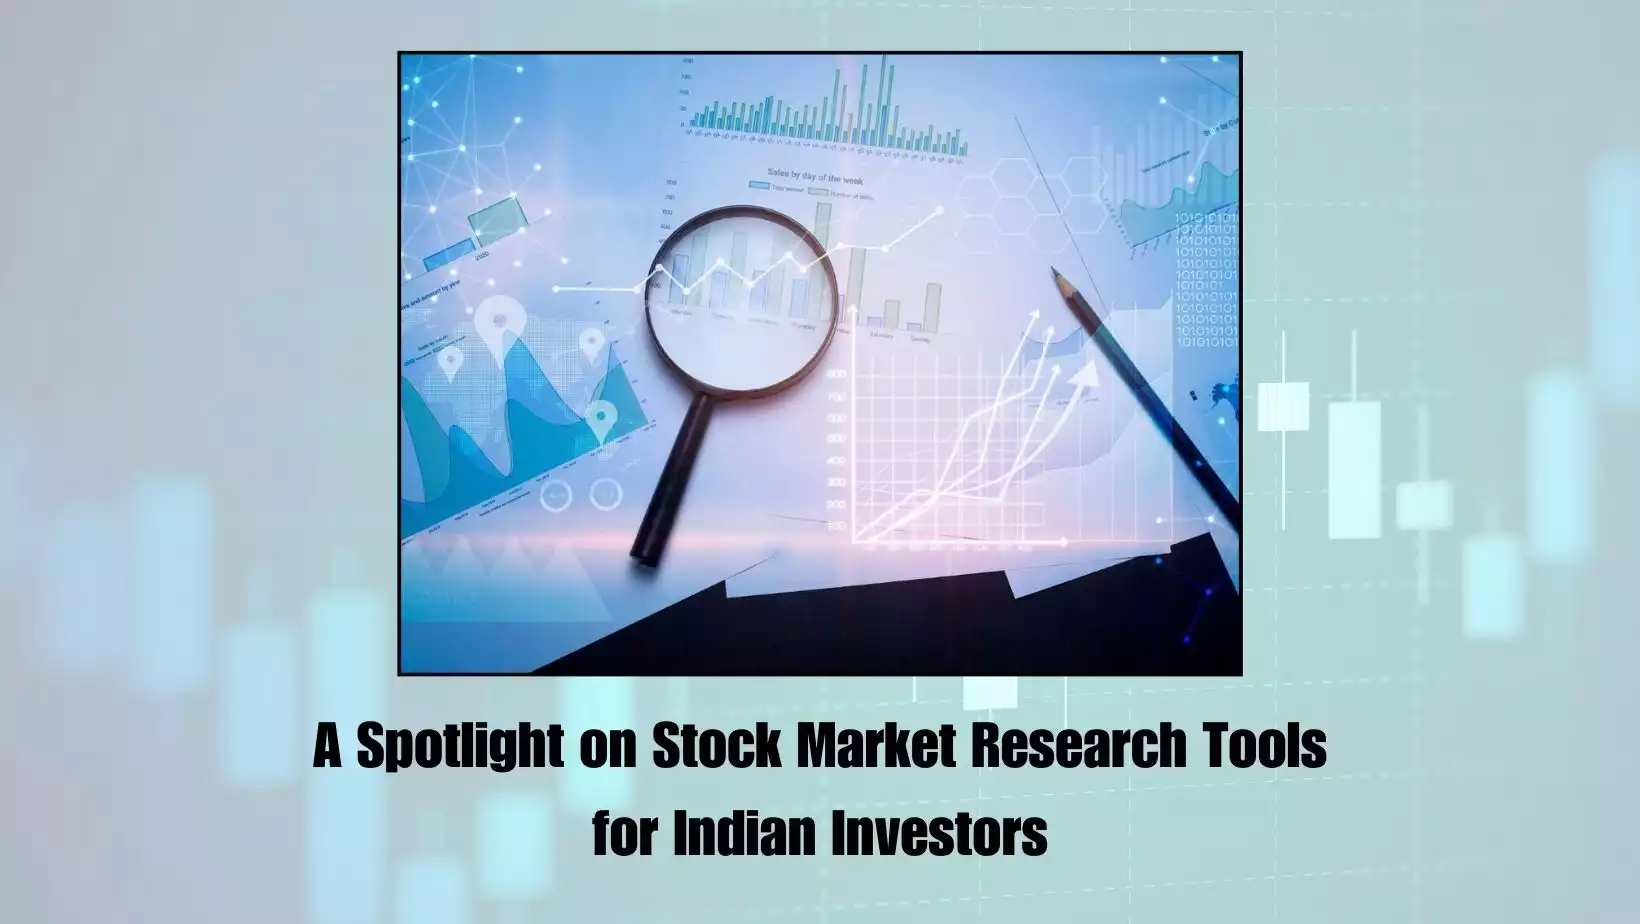 A Spotlight on Stock Market Research Tools for Indian Investors